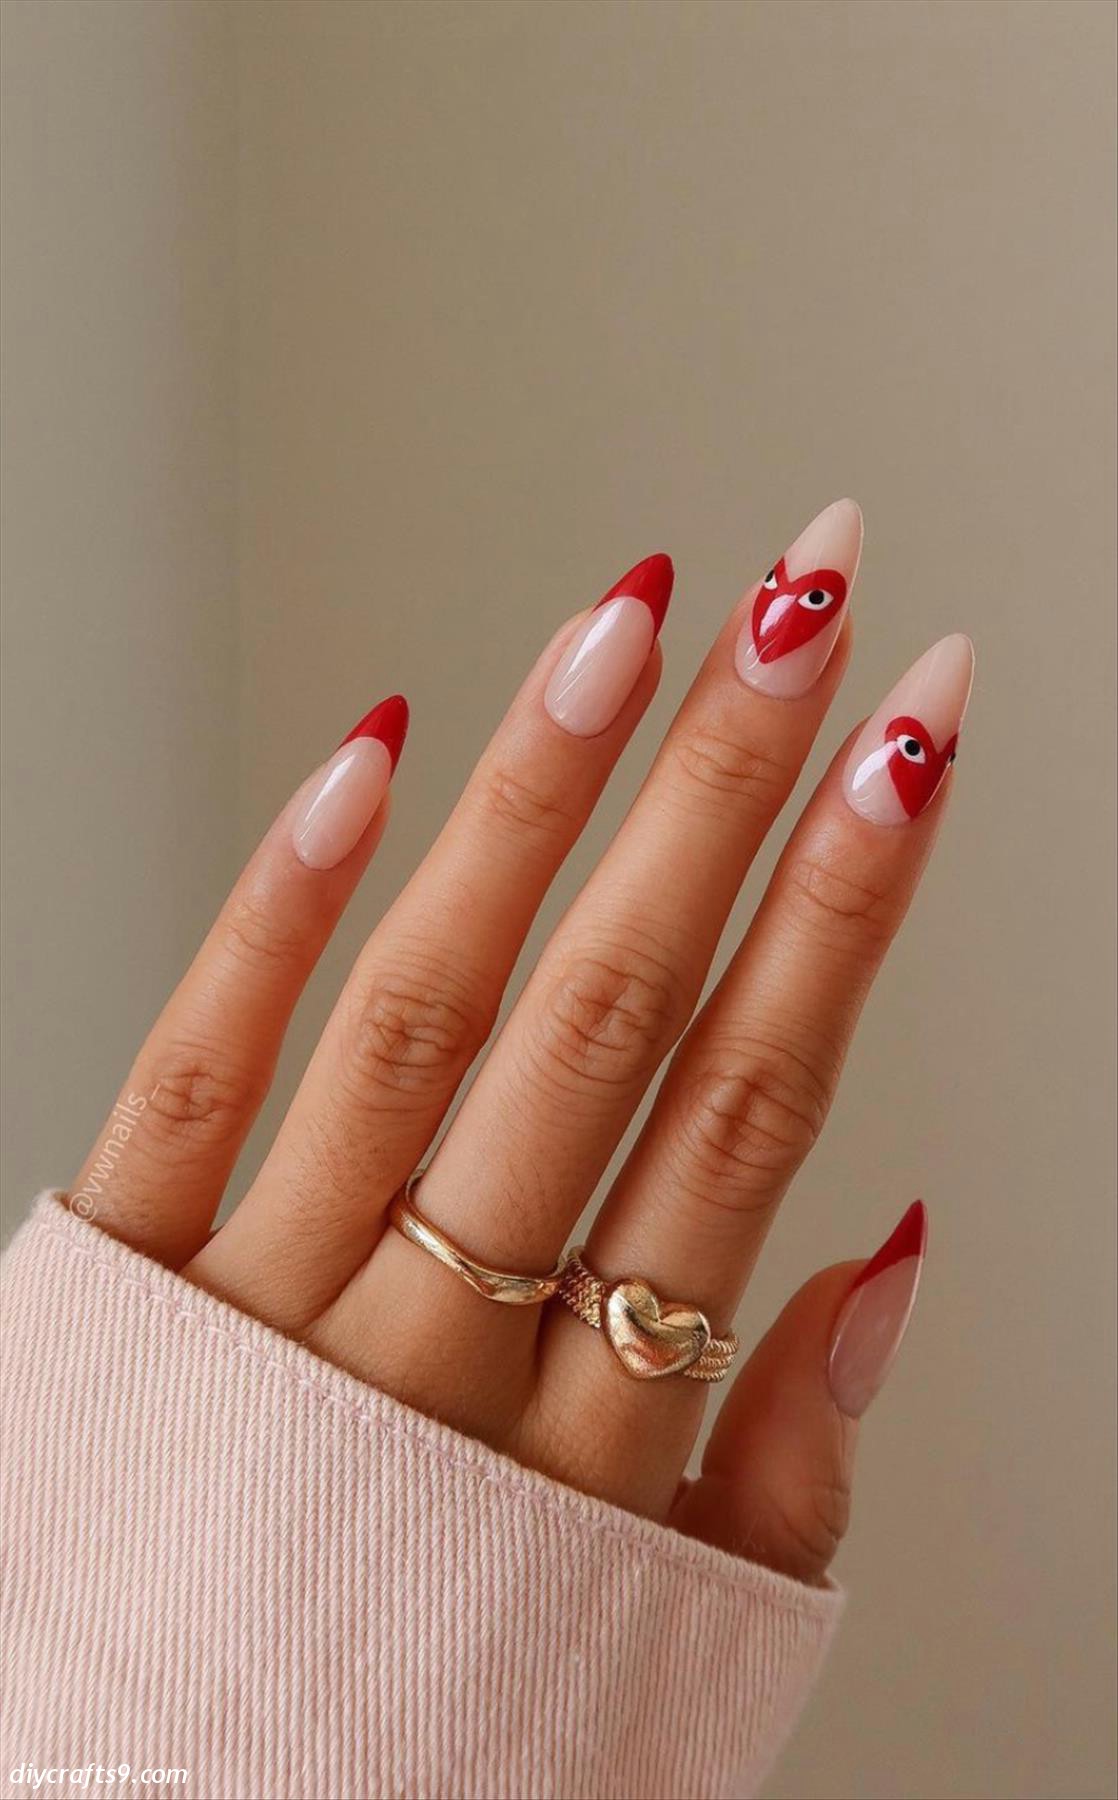 Red Valentines Day nails design for February